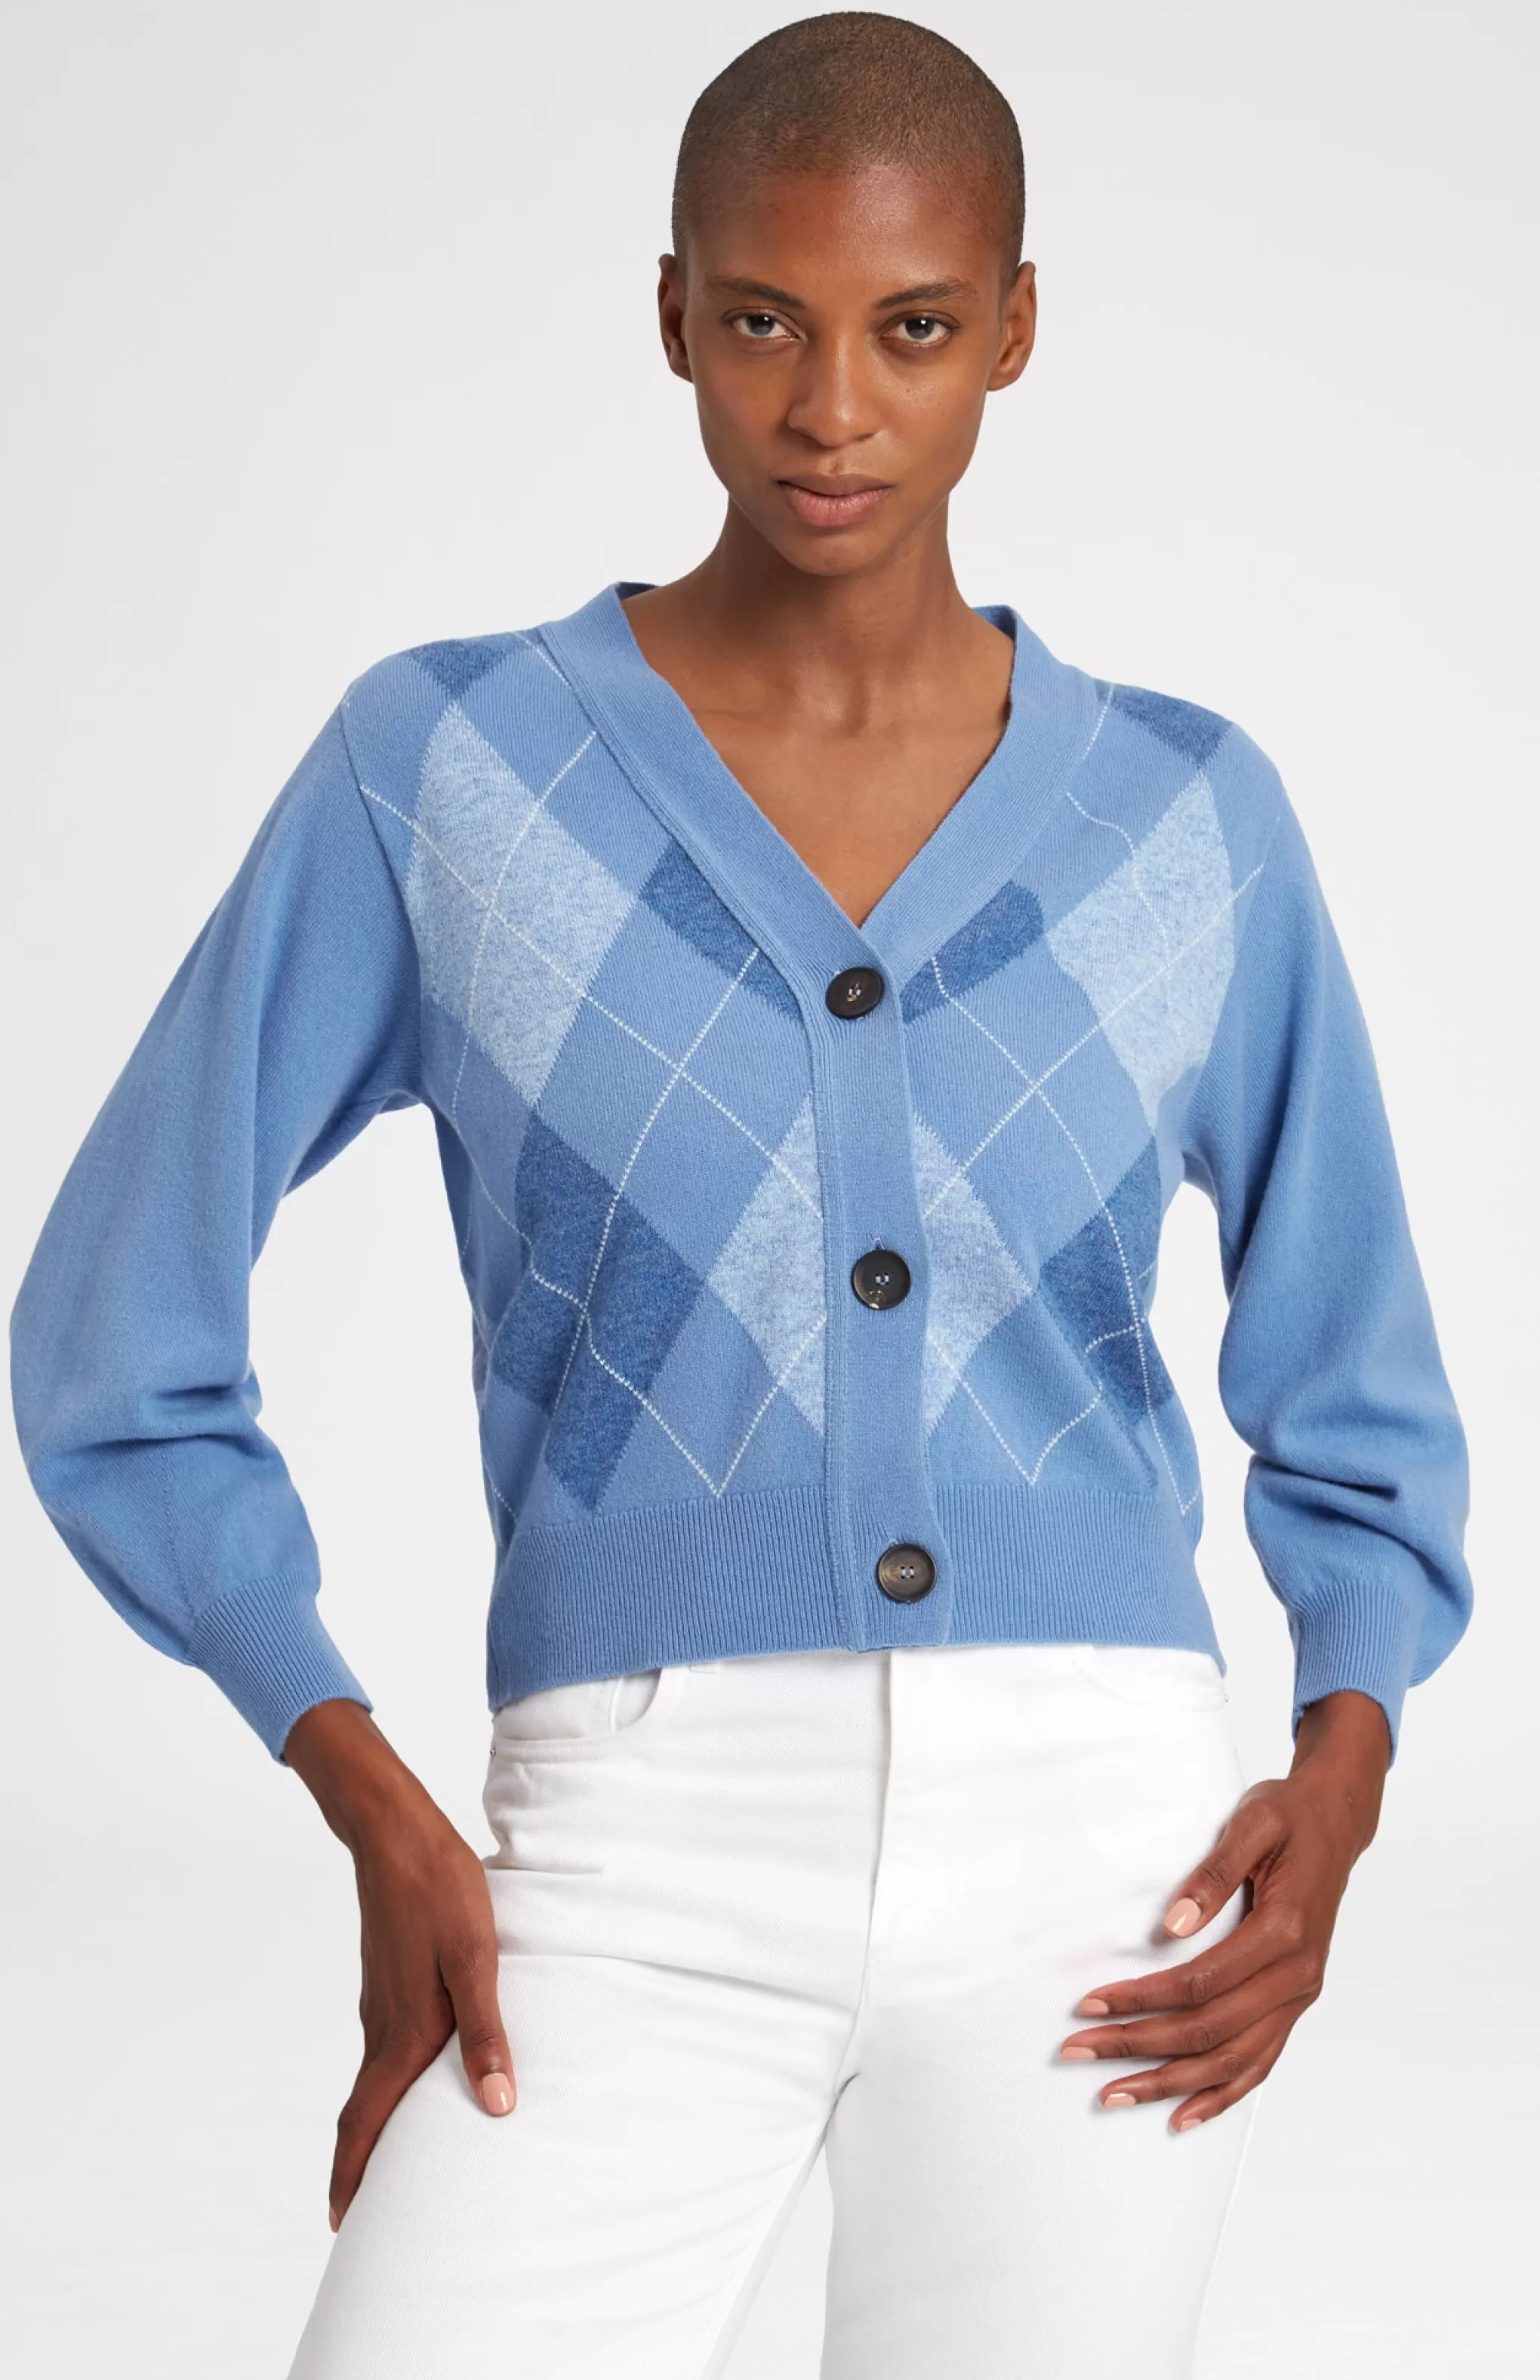 Cheap Argyle 3 Button Wool Cashmere Blend Cardigan In Bluestone And Sky Men/Women V Neck Knits